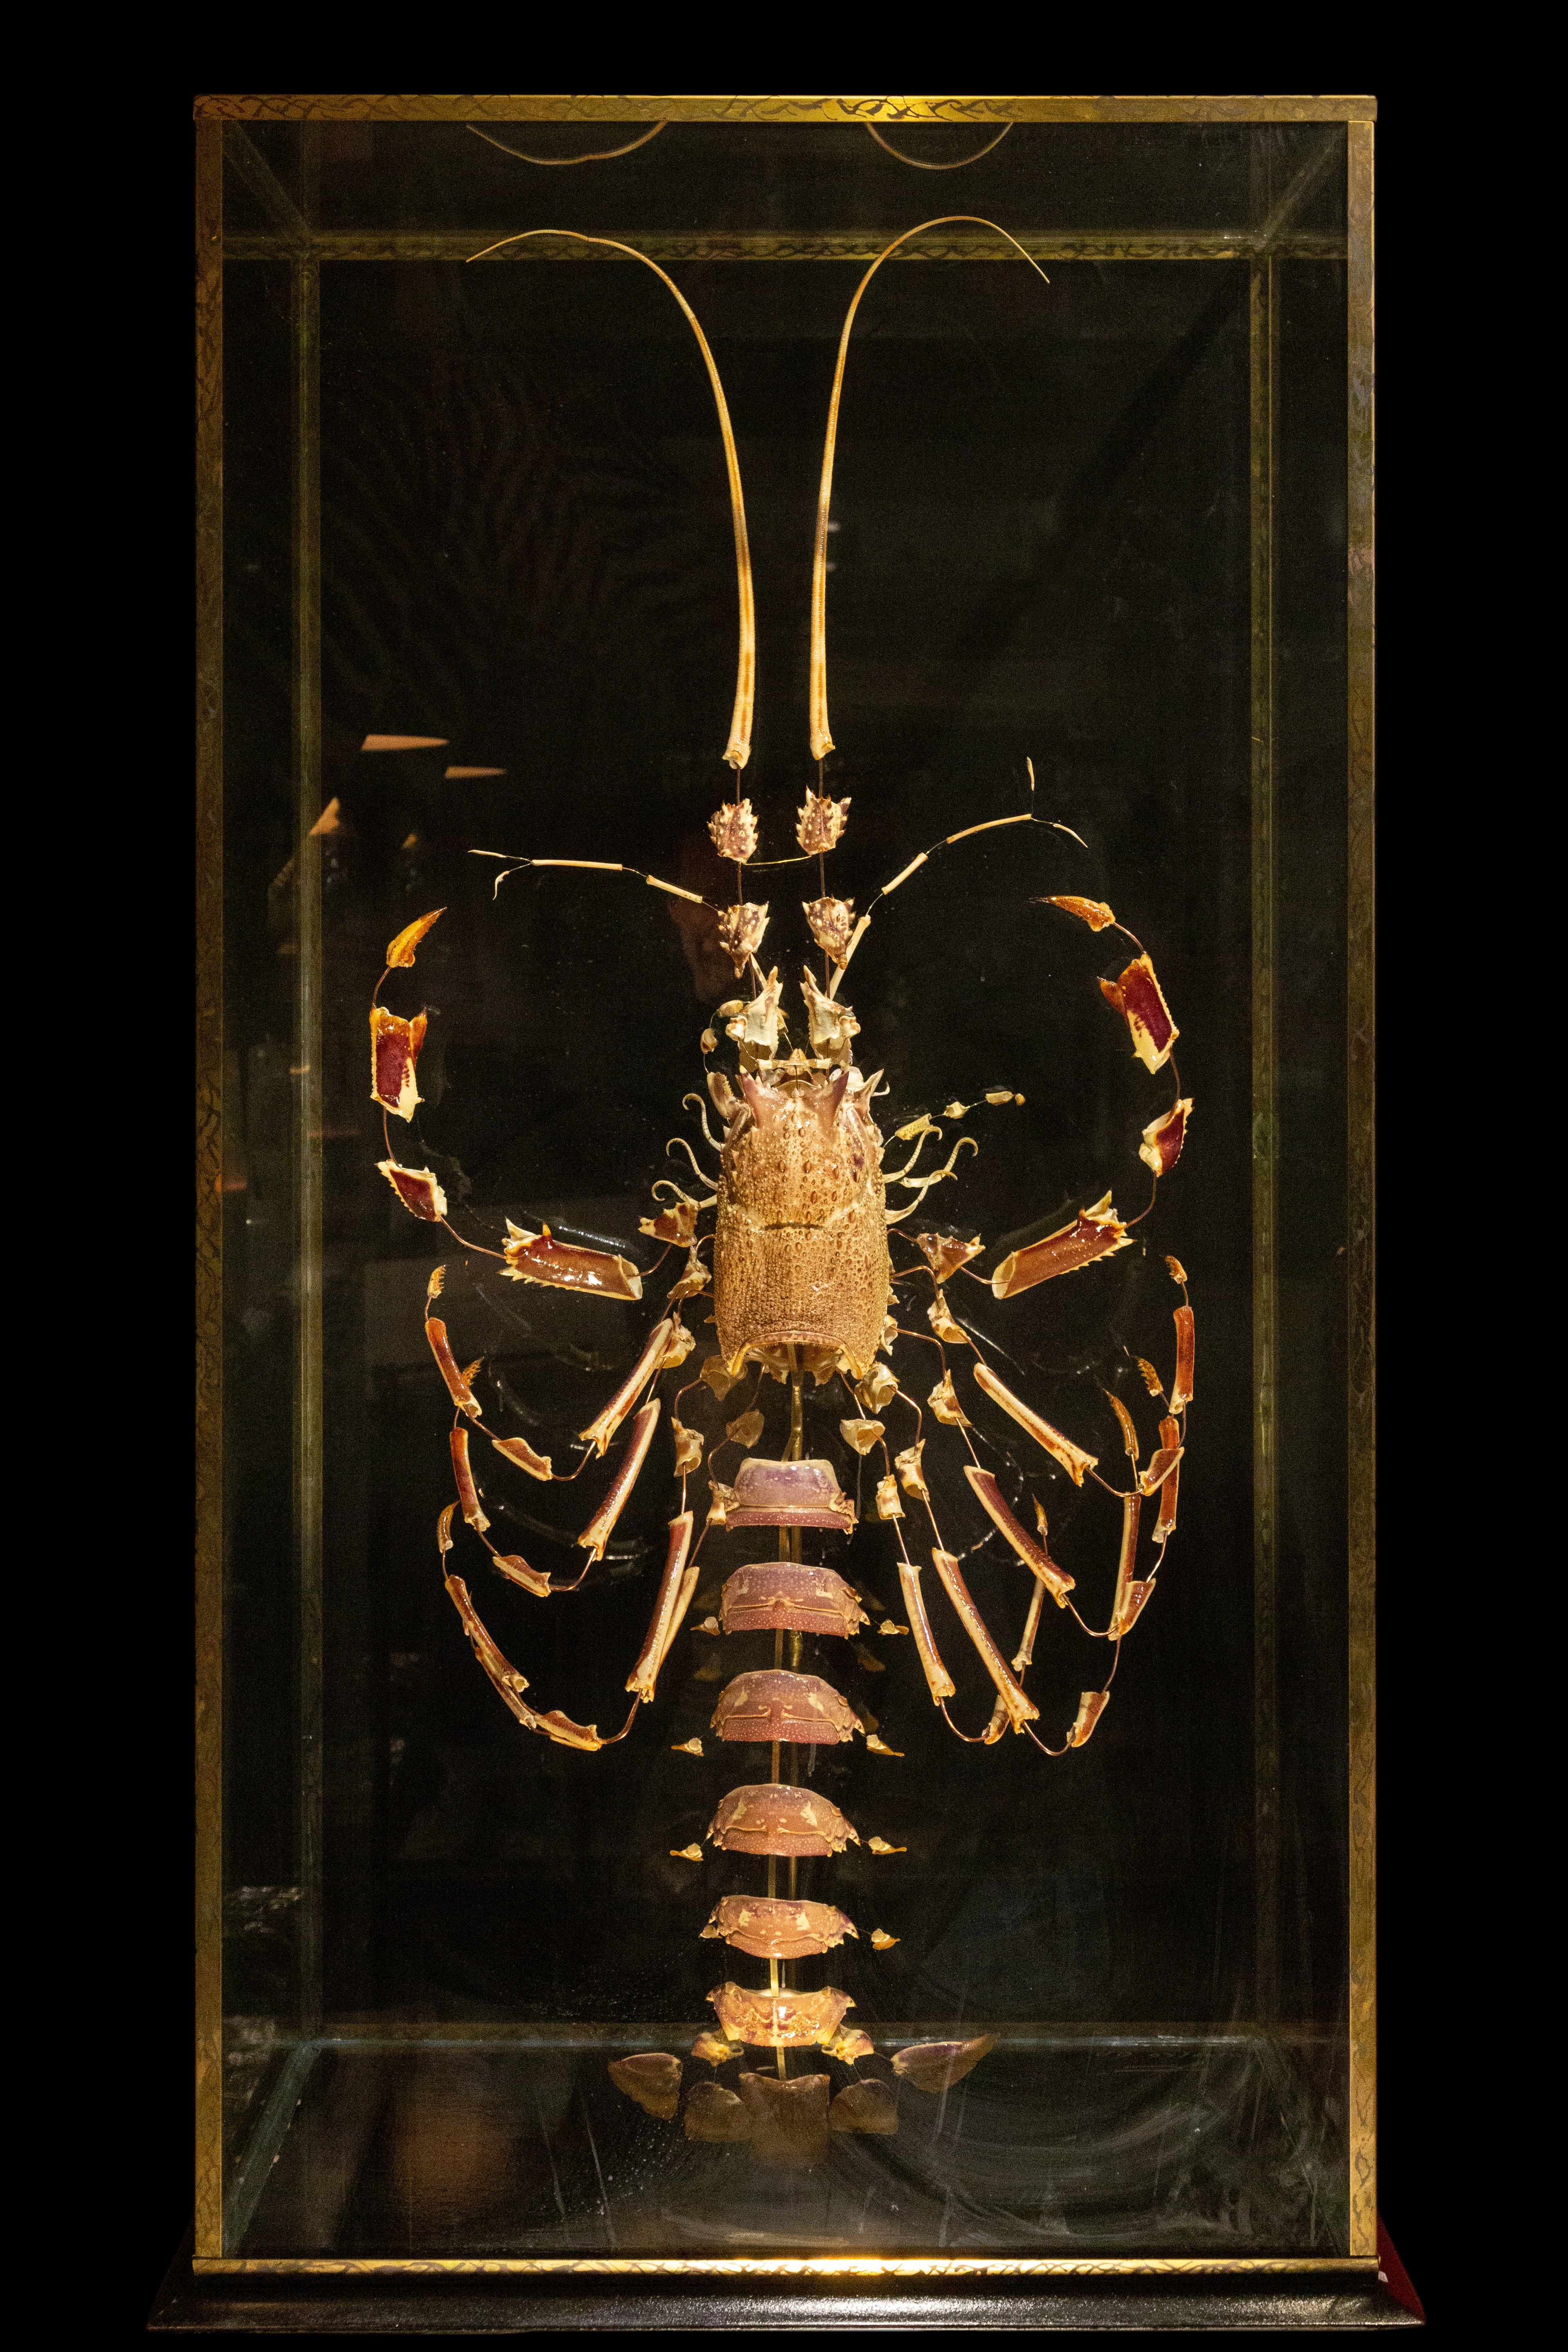 Large French Deconstructed Clawed Lobster Sculpture in a Glass and Brass Case